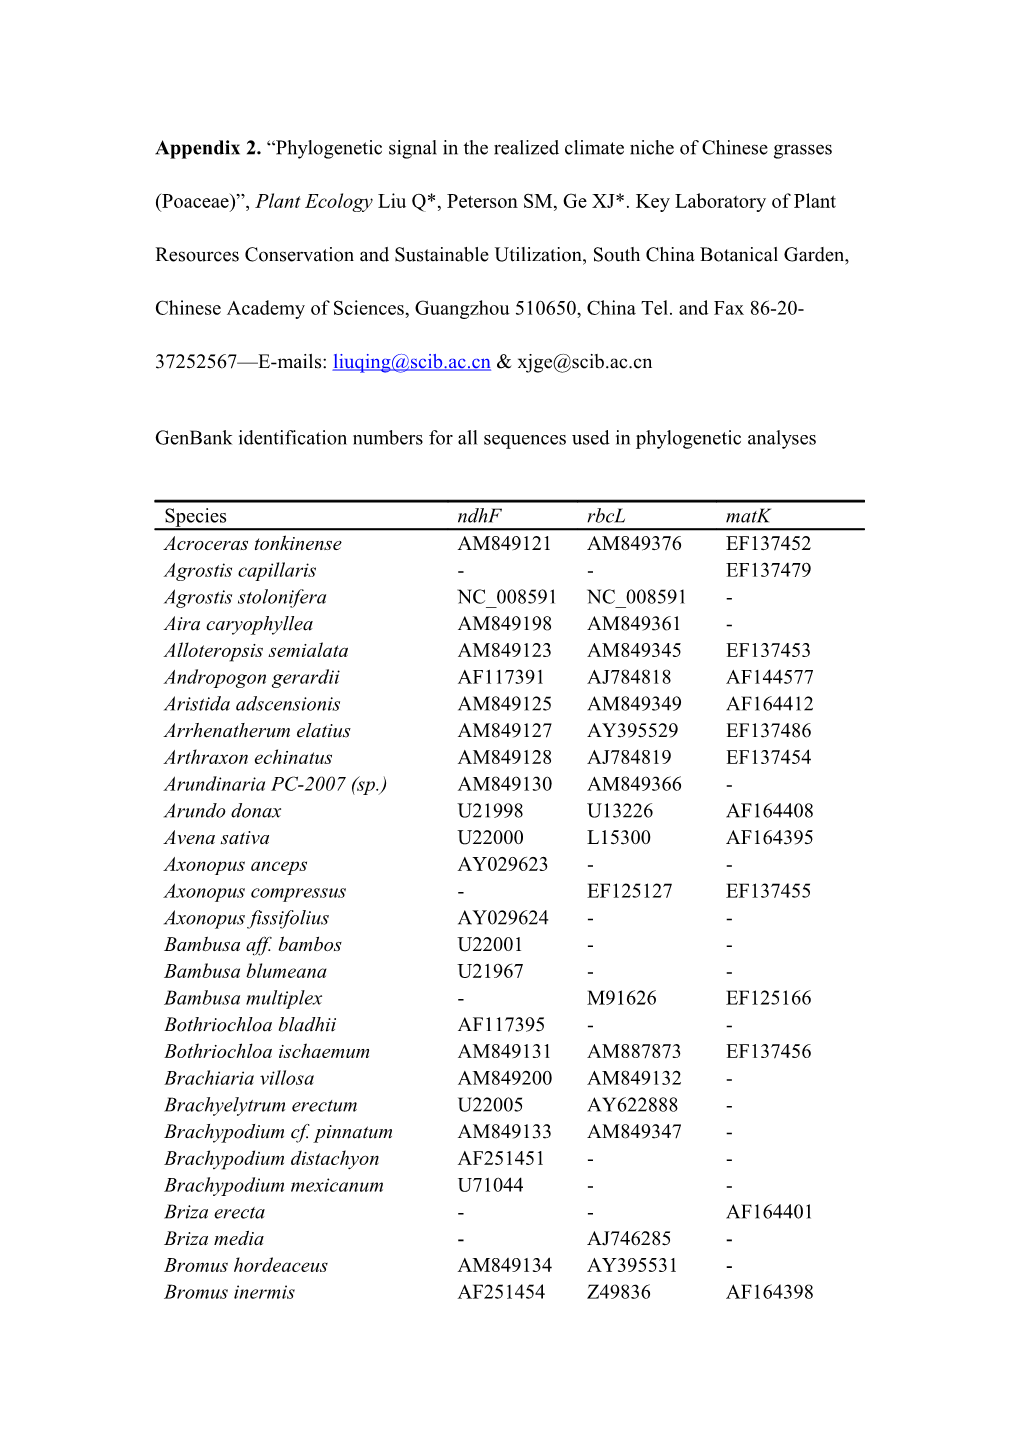 Genbank Identification Numbers for All Sequences Used in Phylogenetic Analyses